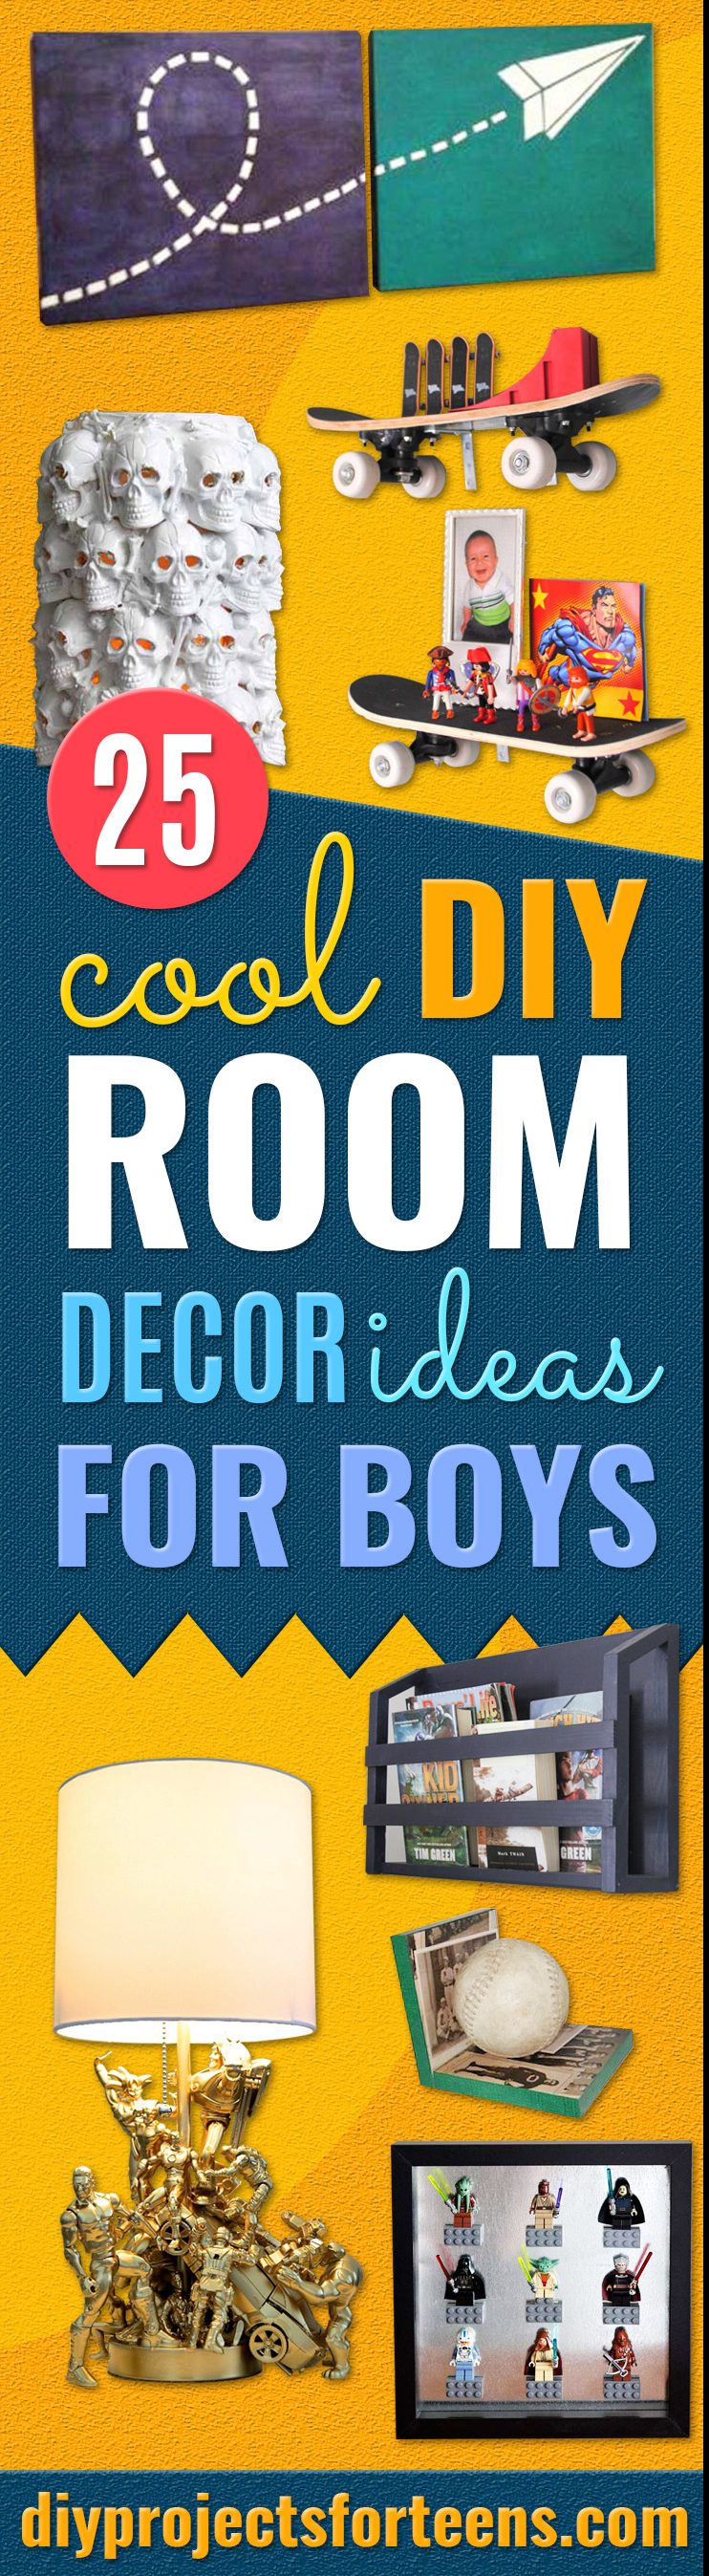 DIY Room Decor Ideas for Boys- Teen Boy Bedroom Decorating Ideas Pinterest - Cheap and Cool Ways to Decorate Boys Room in House - DYI Tutorial and Projects for Wall Art, Bedding, Tabletop decor, shelves, rugs, lamps